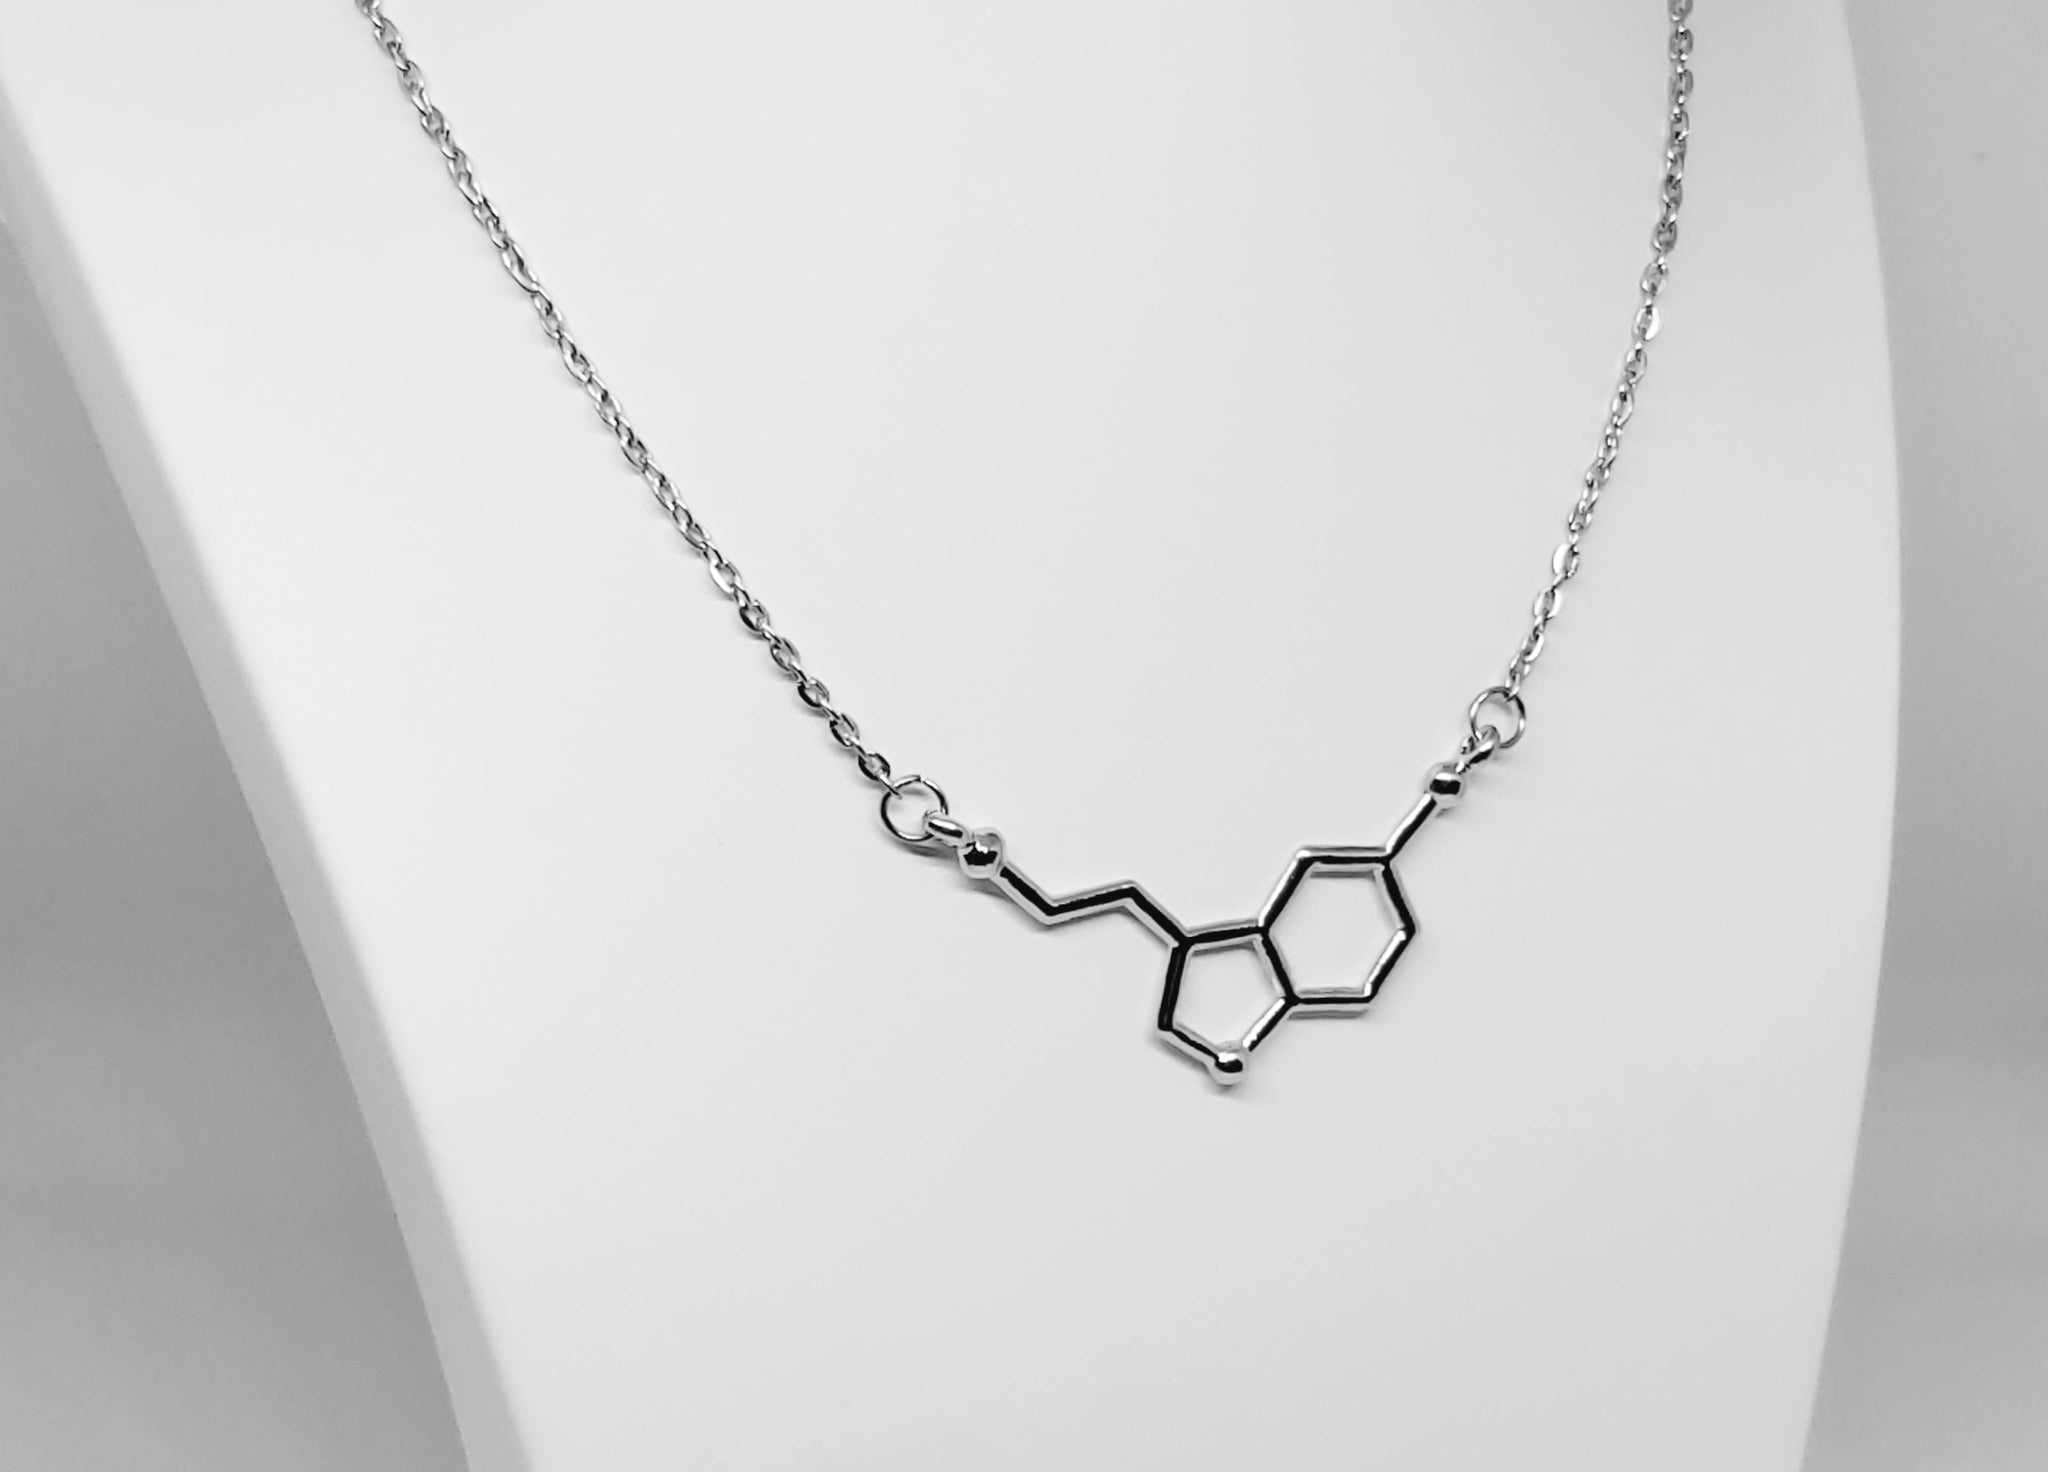 Silver caffeine necklace - My Chemical Gift